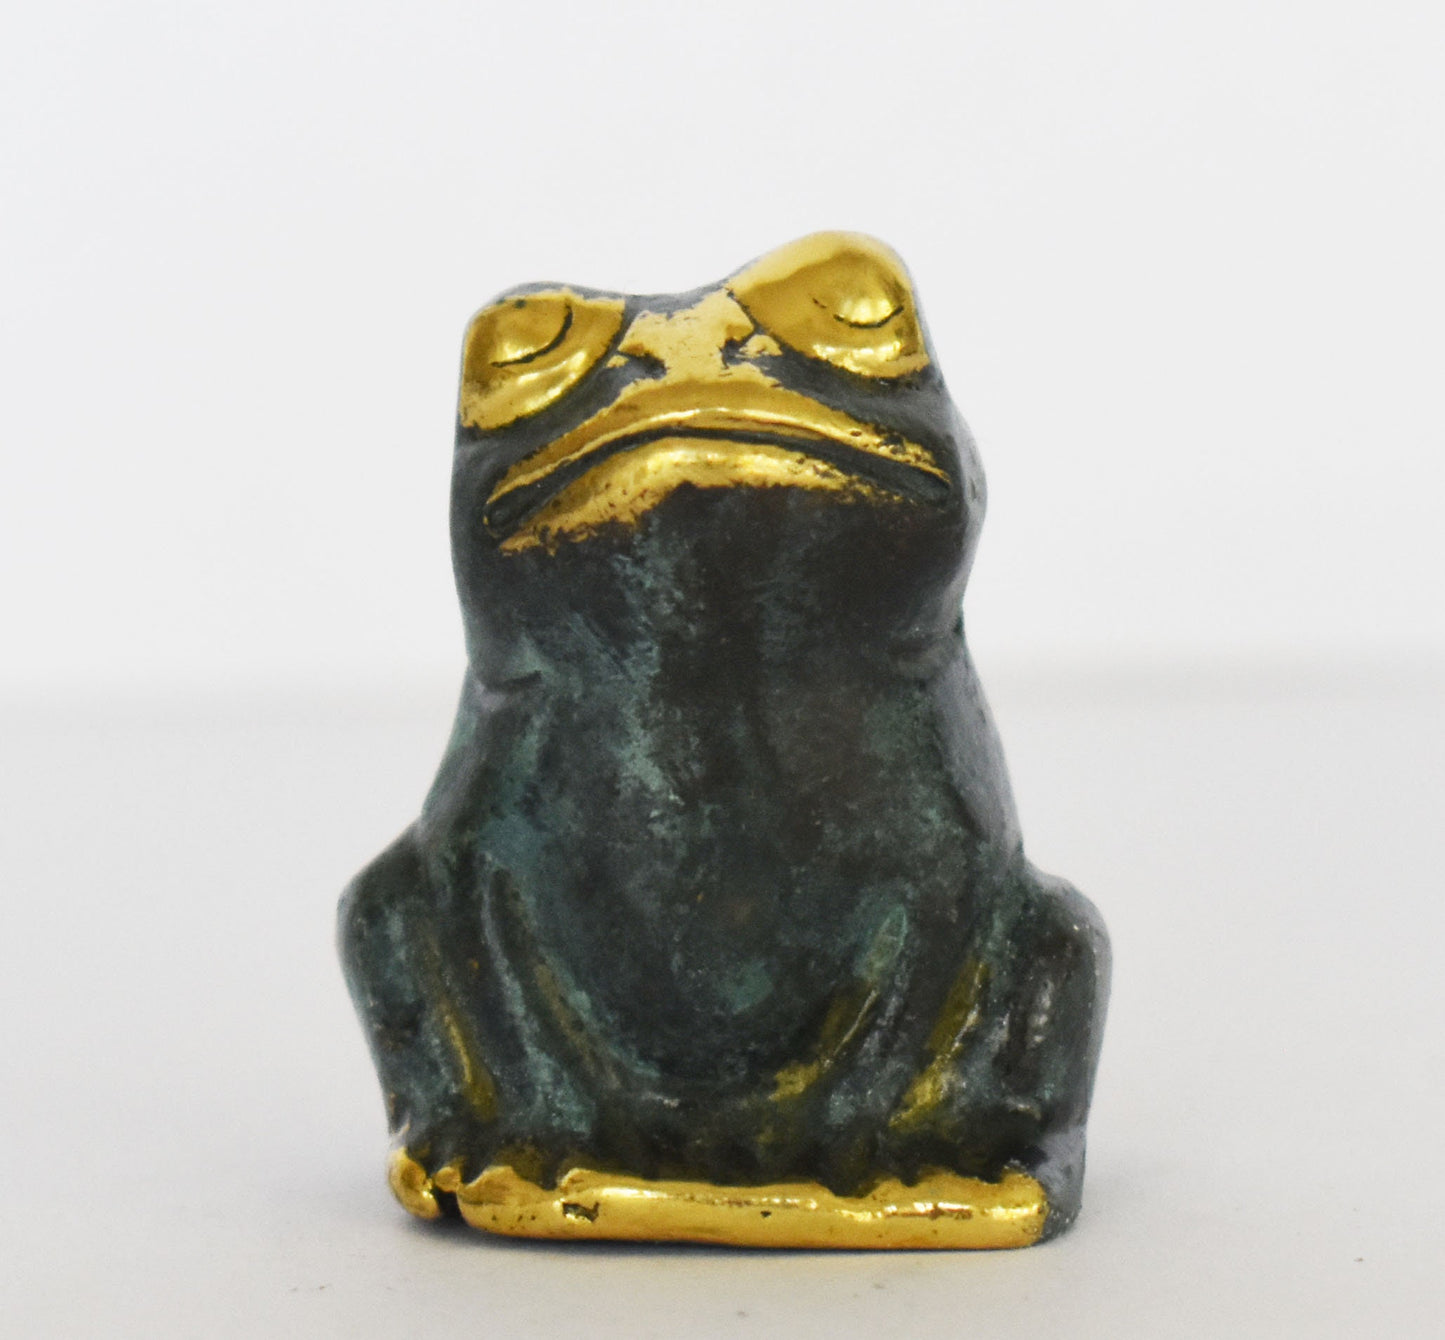 Frog - Subject of Fable Attributed to Aesop - Symbol of Fertility, Harmony and Licentiousness - Miniature - pure bronze  statue